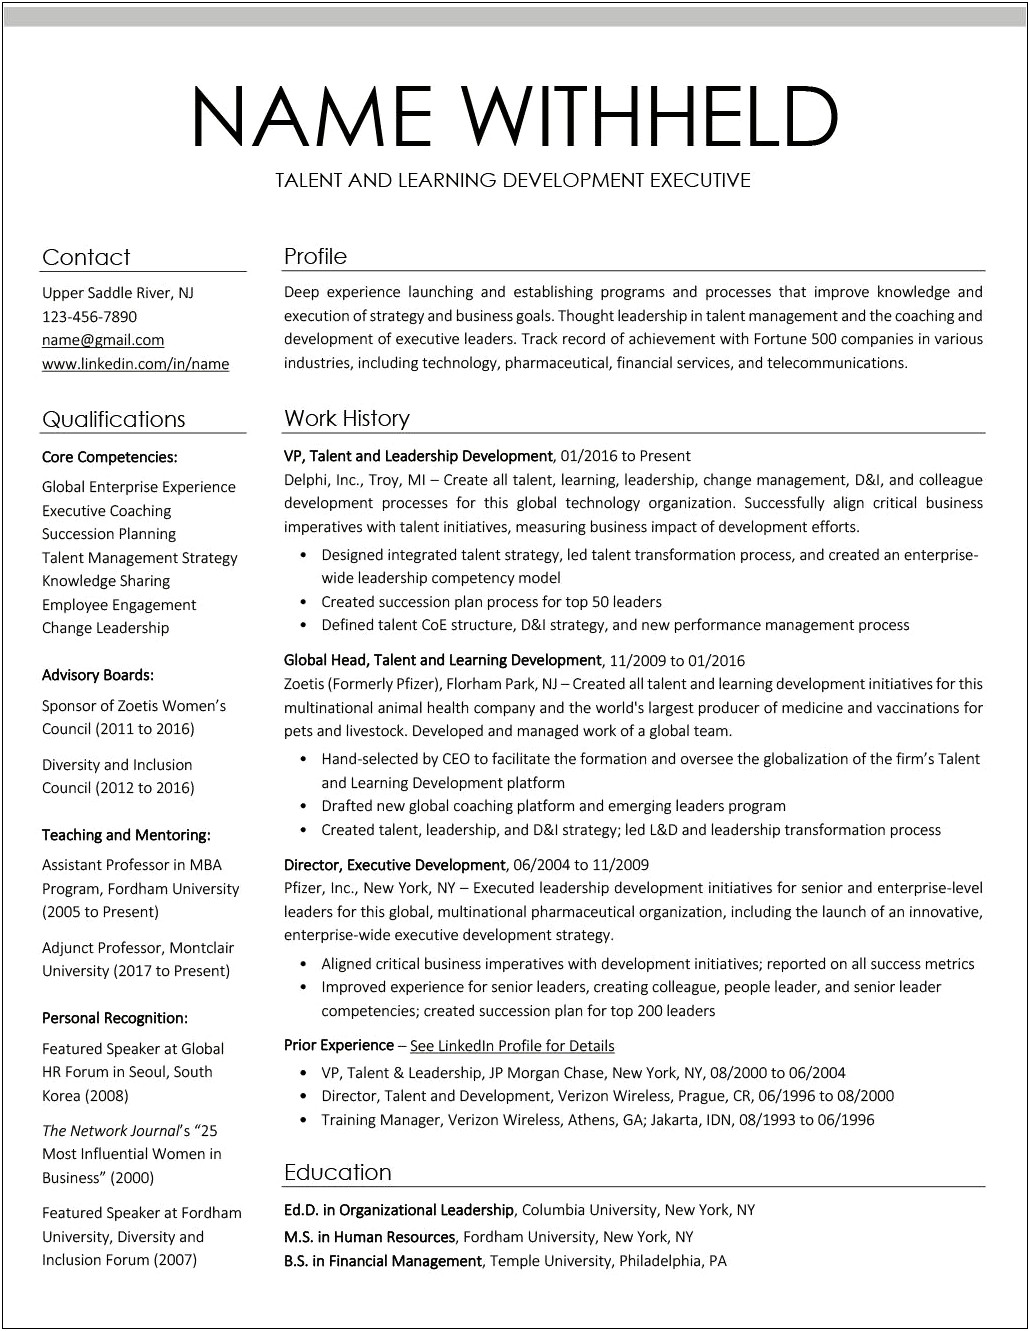 Sample Analyst Diversity And Inclusion Resume